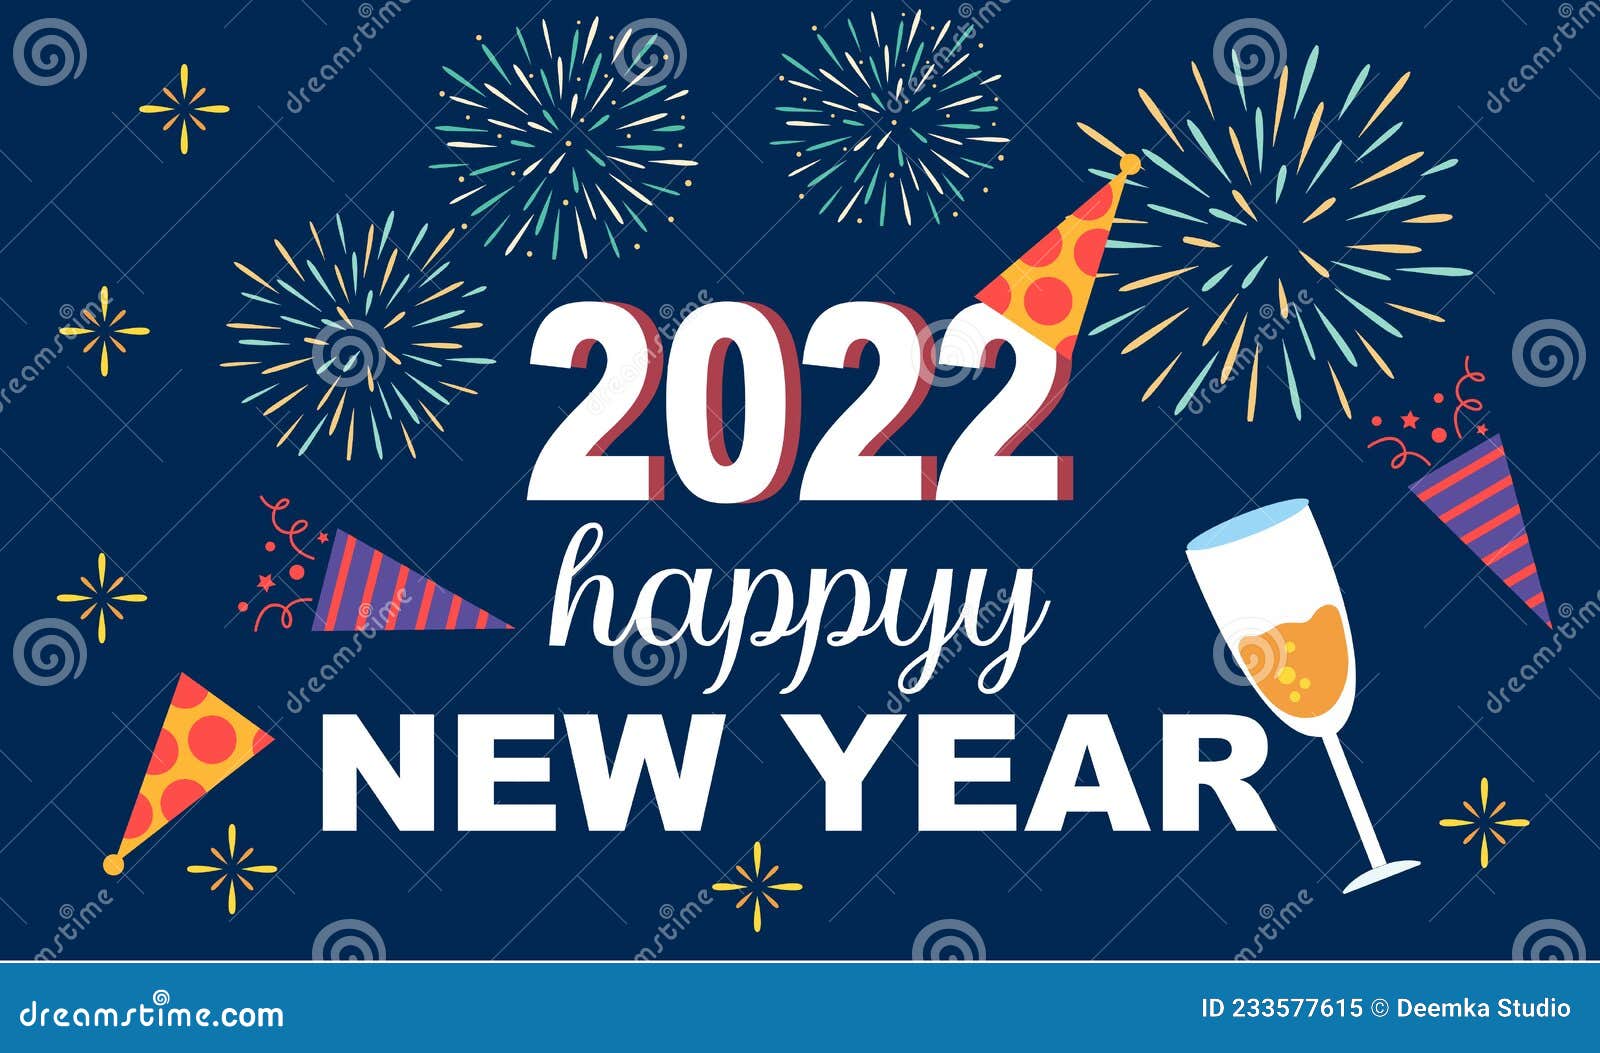 Happy New Year 2022 Background Vector Stock Vector - Illustration of  design, banner: 233577615